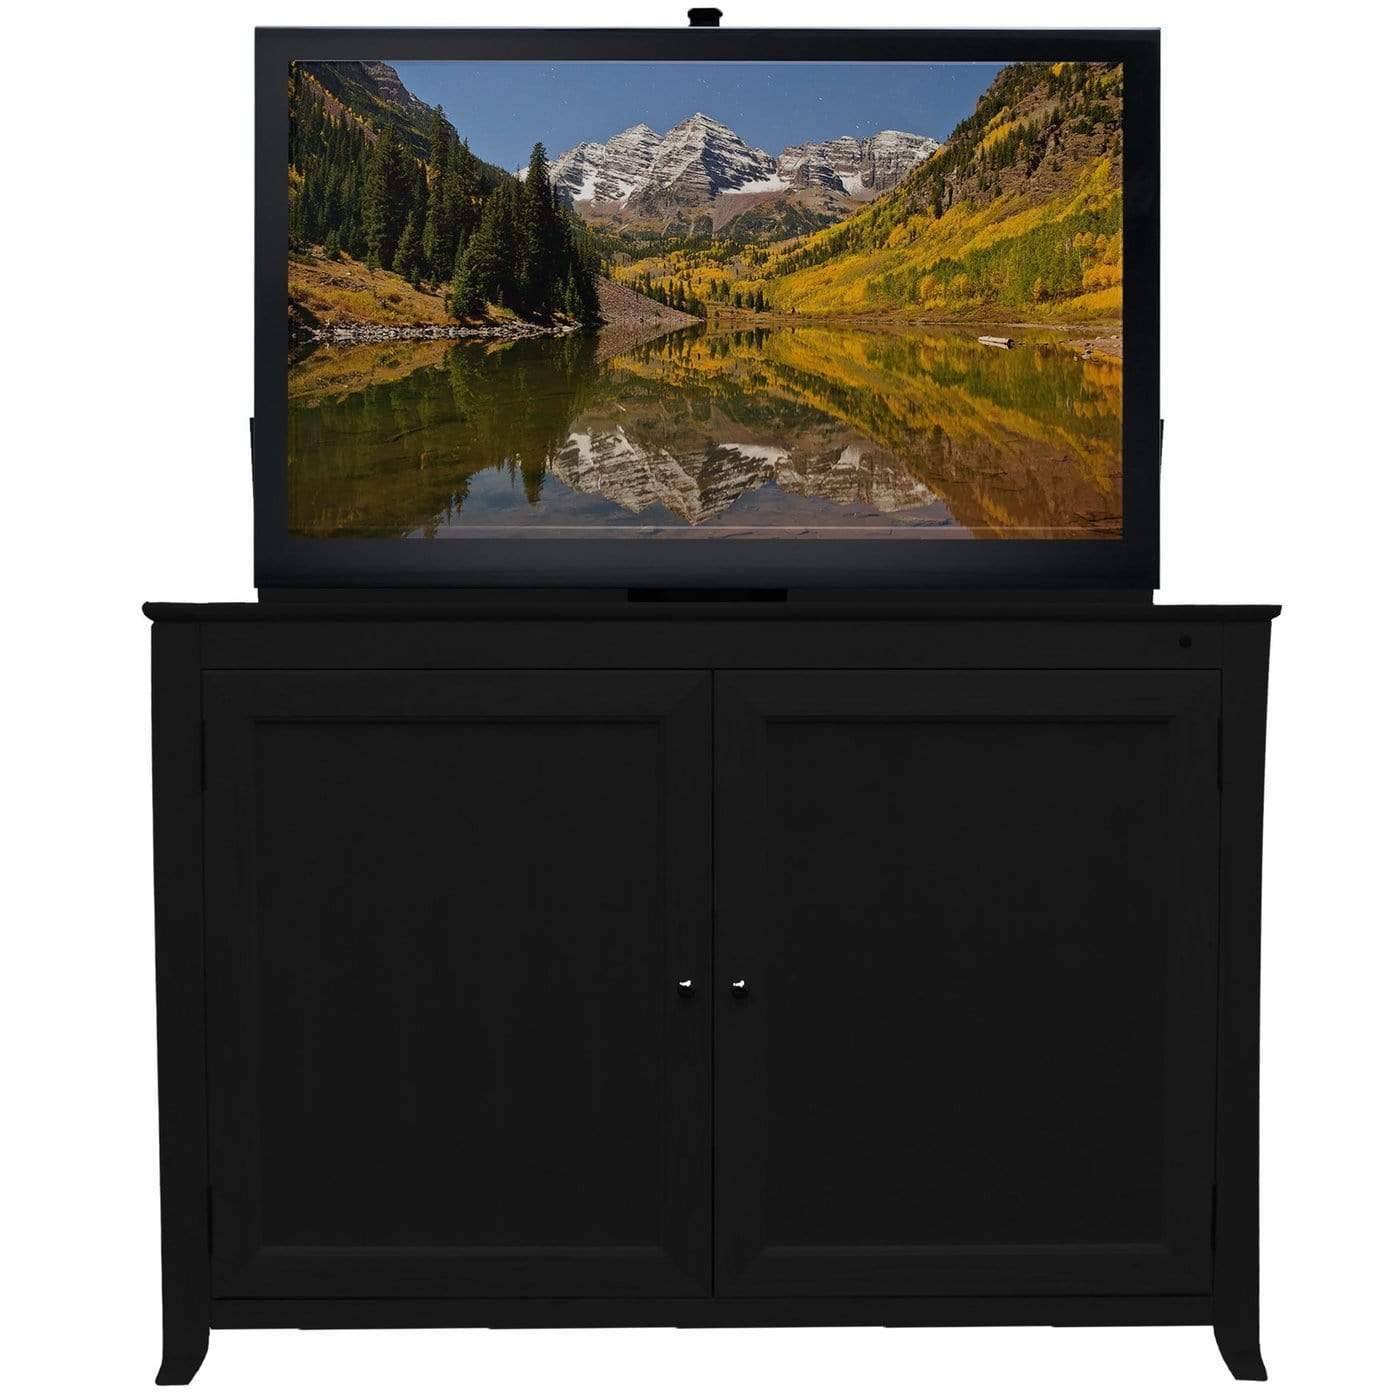 Touchstone Monterey Unfinished TV Lift Cabinet